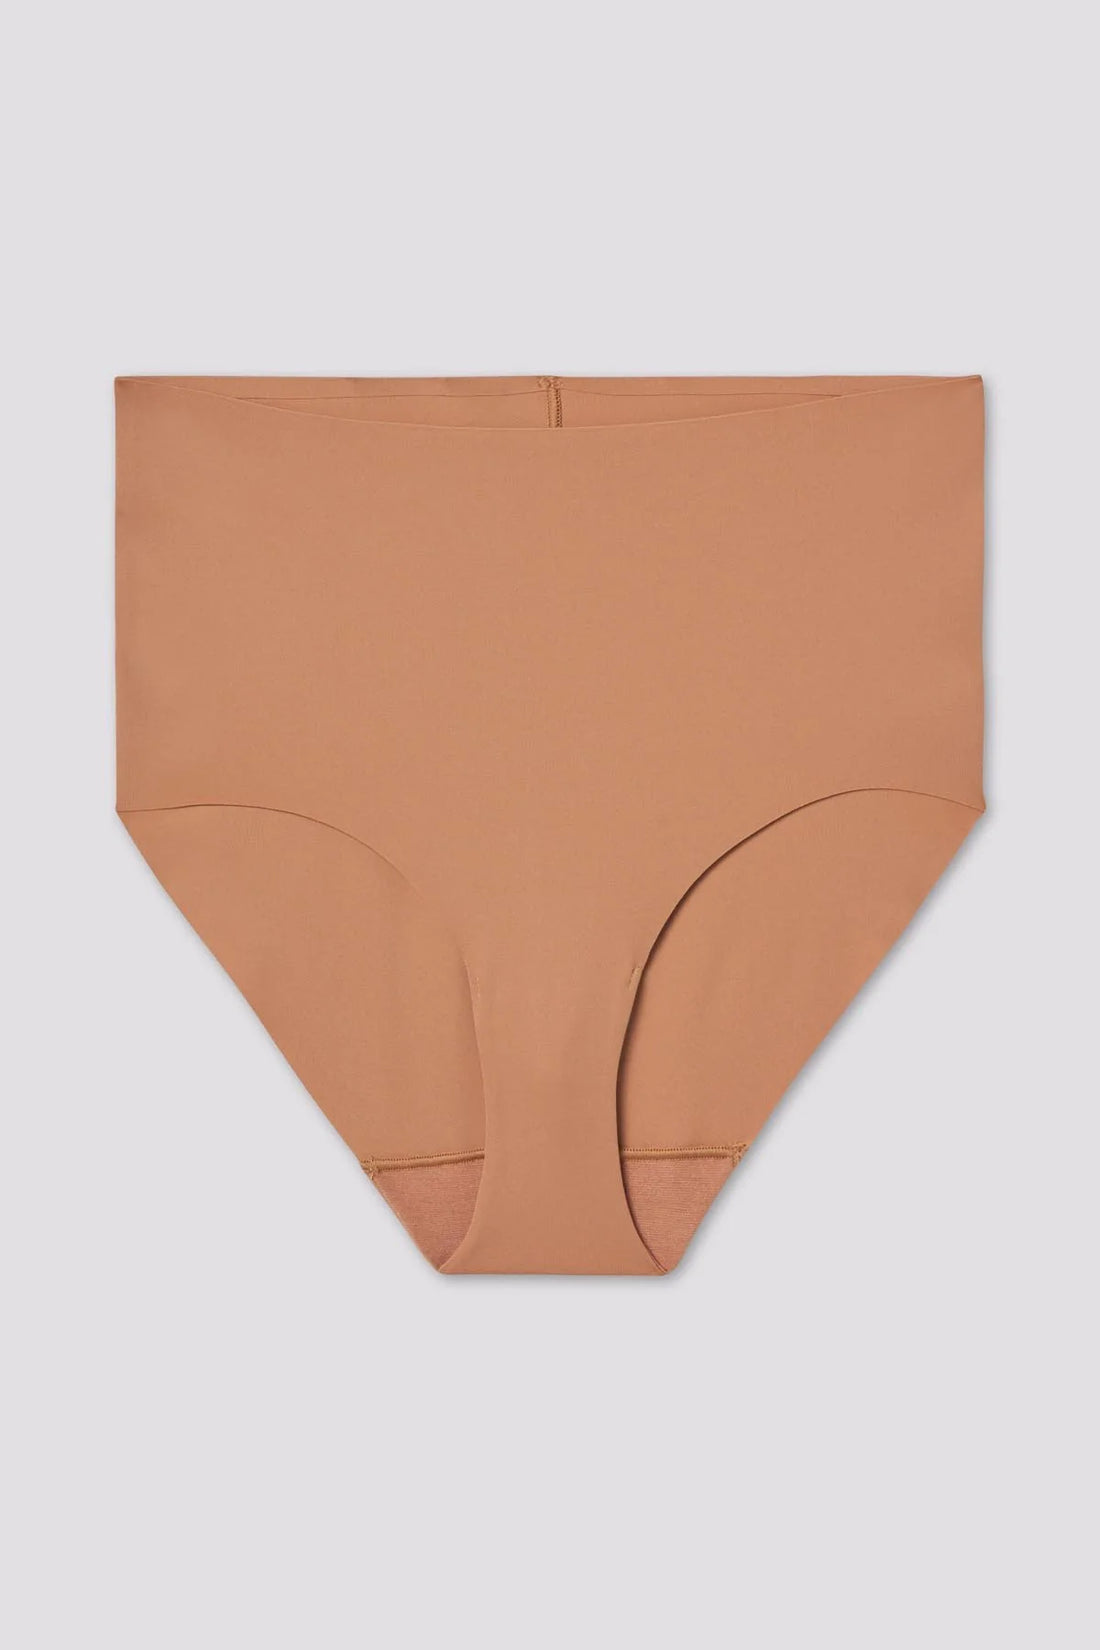 Girlfriend Collective High-Rise Brief in Toast